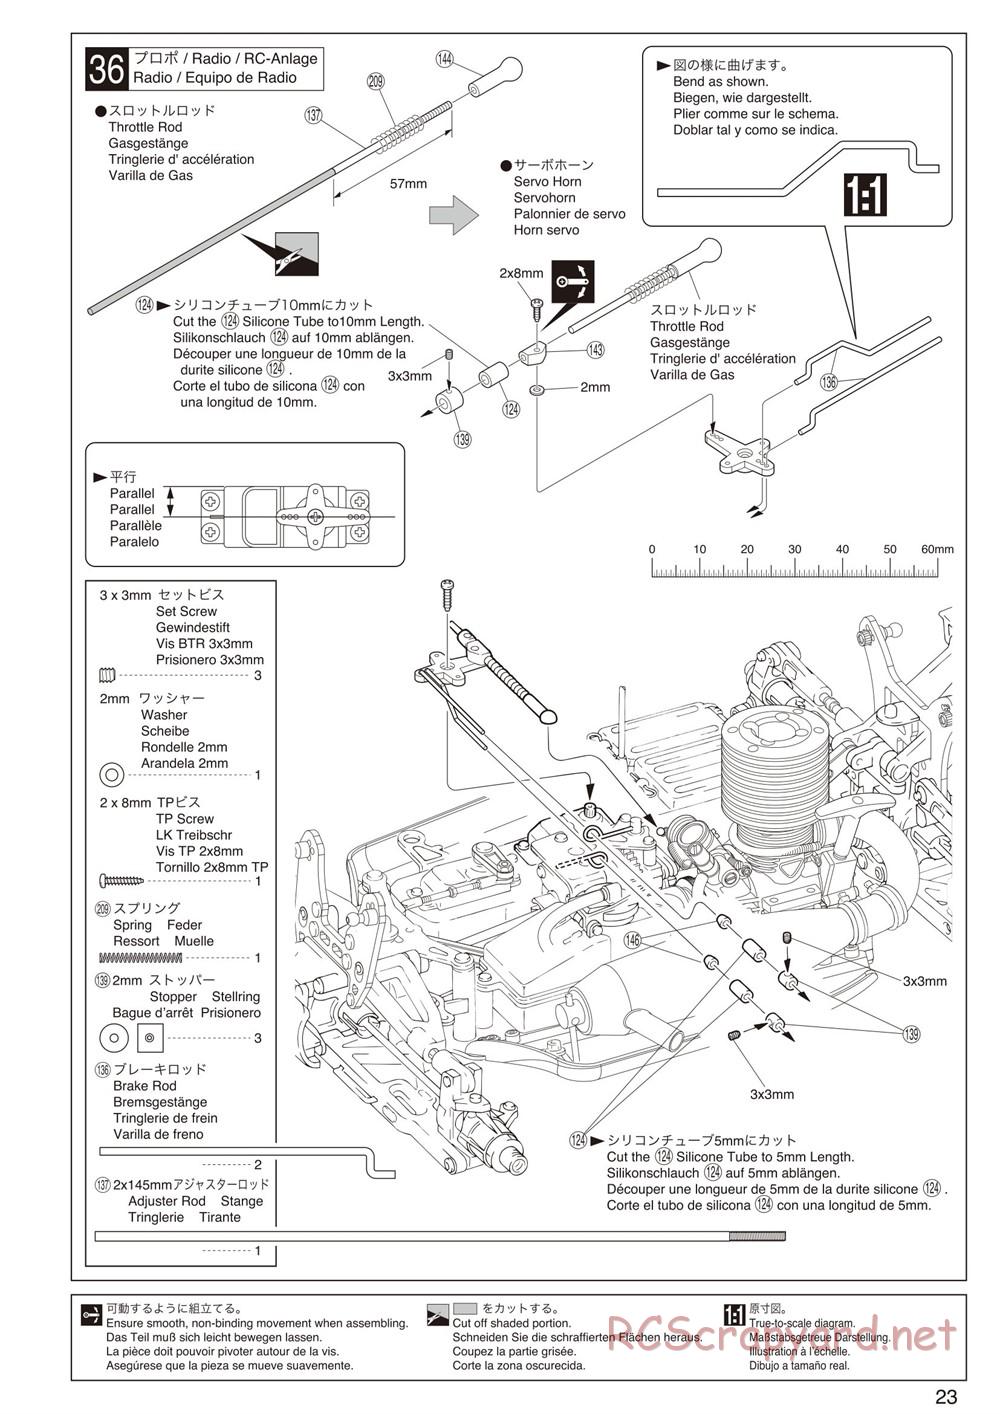 Kyosho - Inferno Neo 2.0 - Manual - Page 23